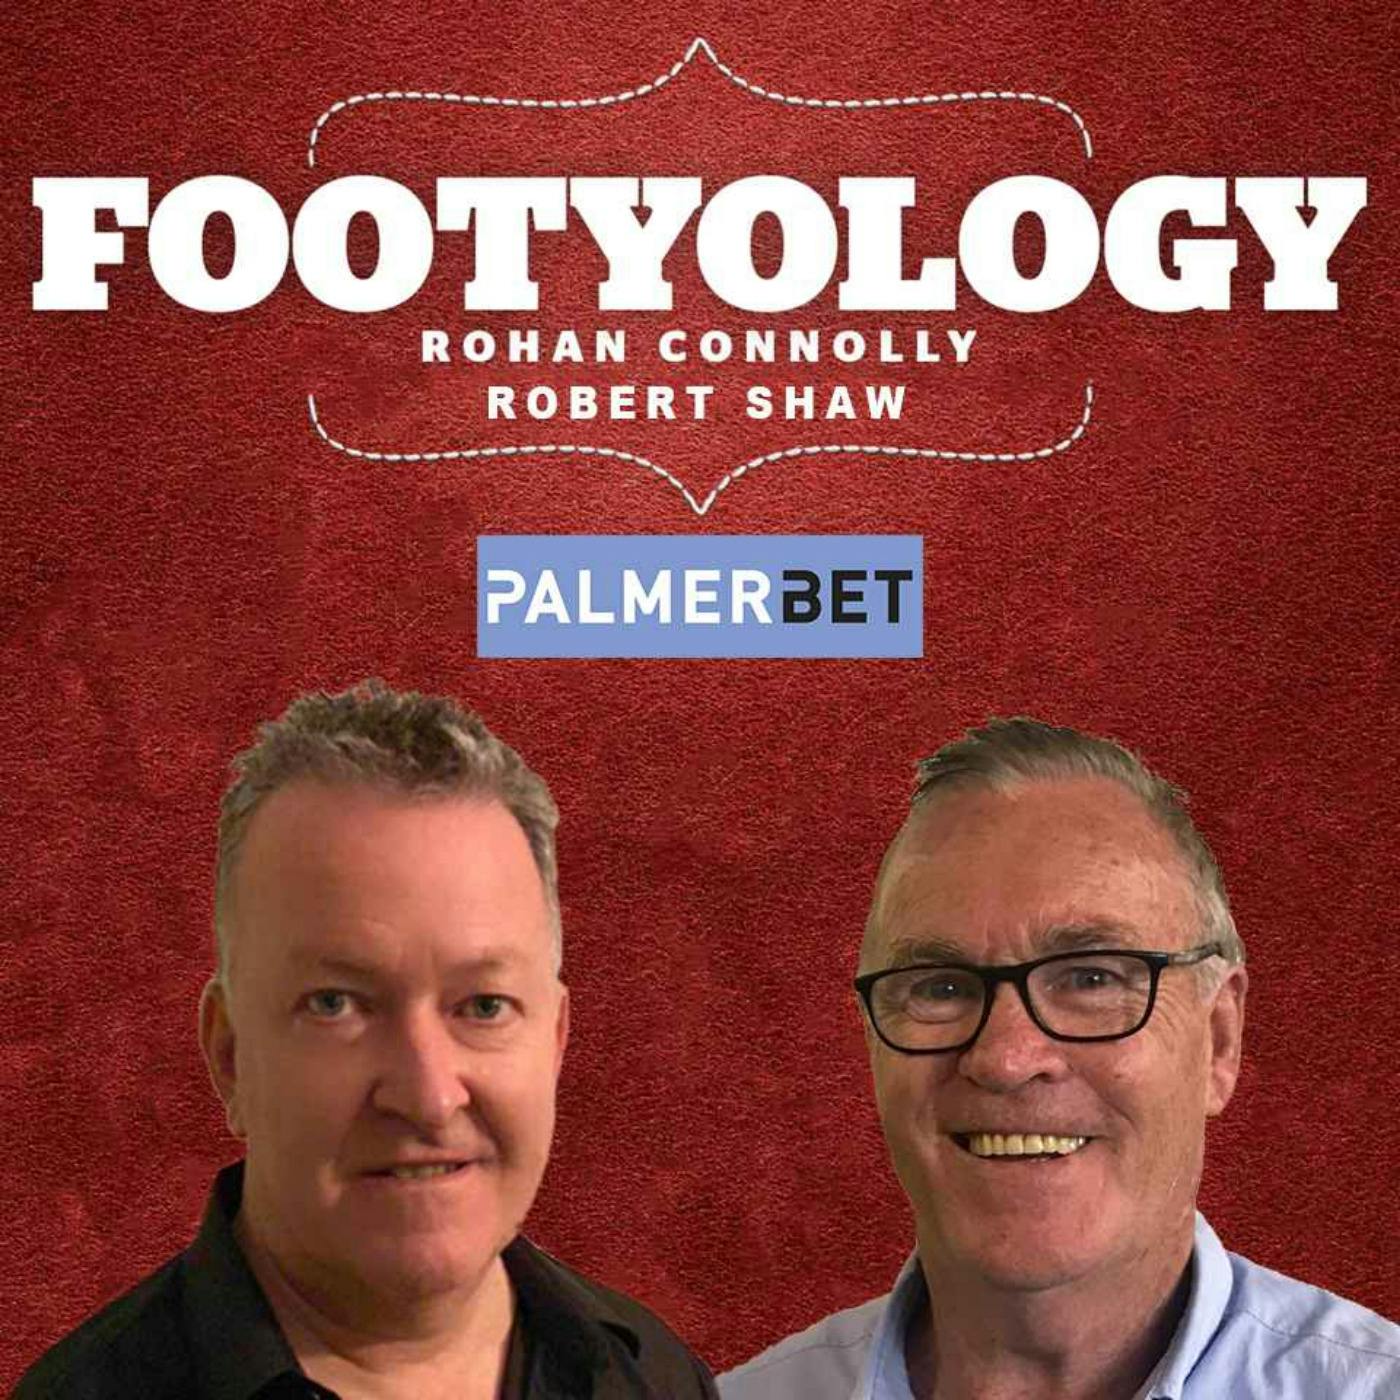 Footyology Podcast - August 21st 2022